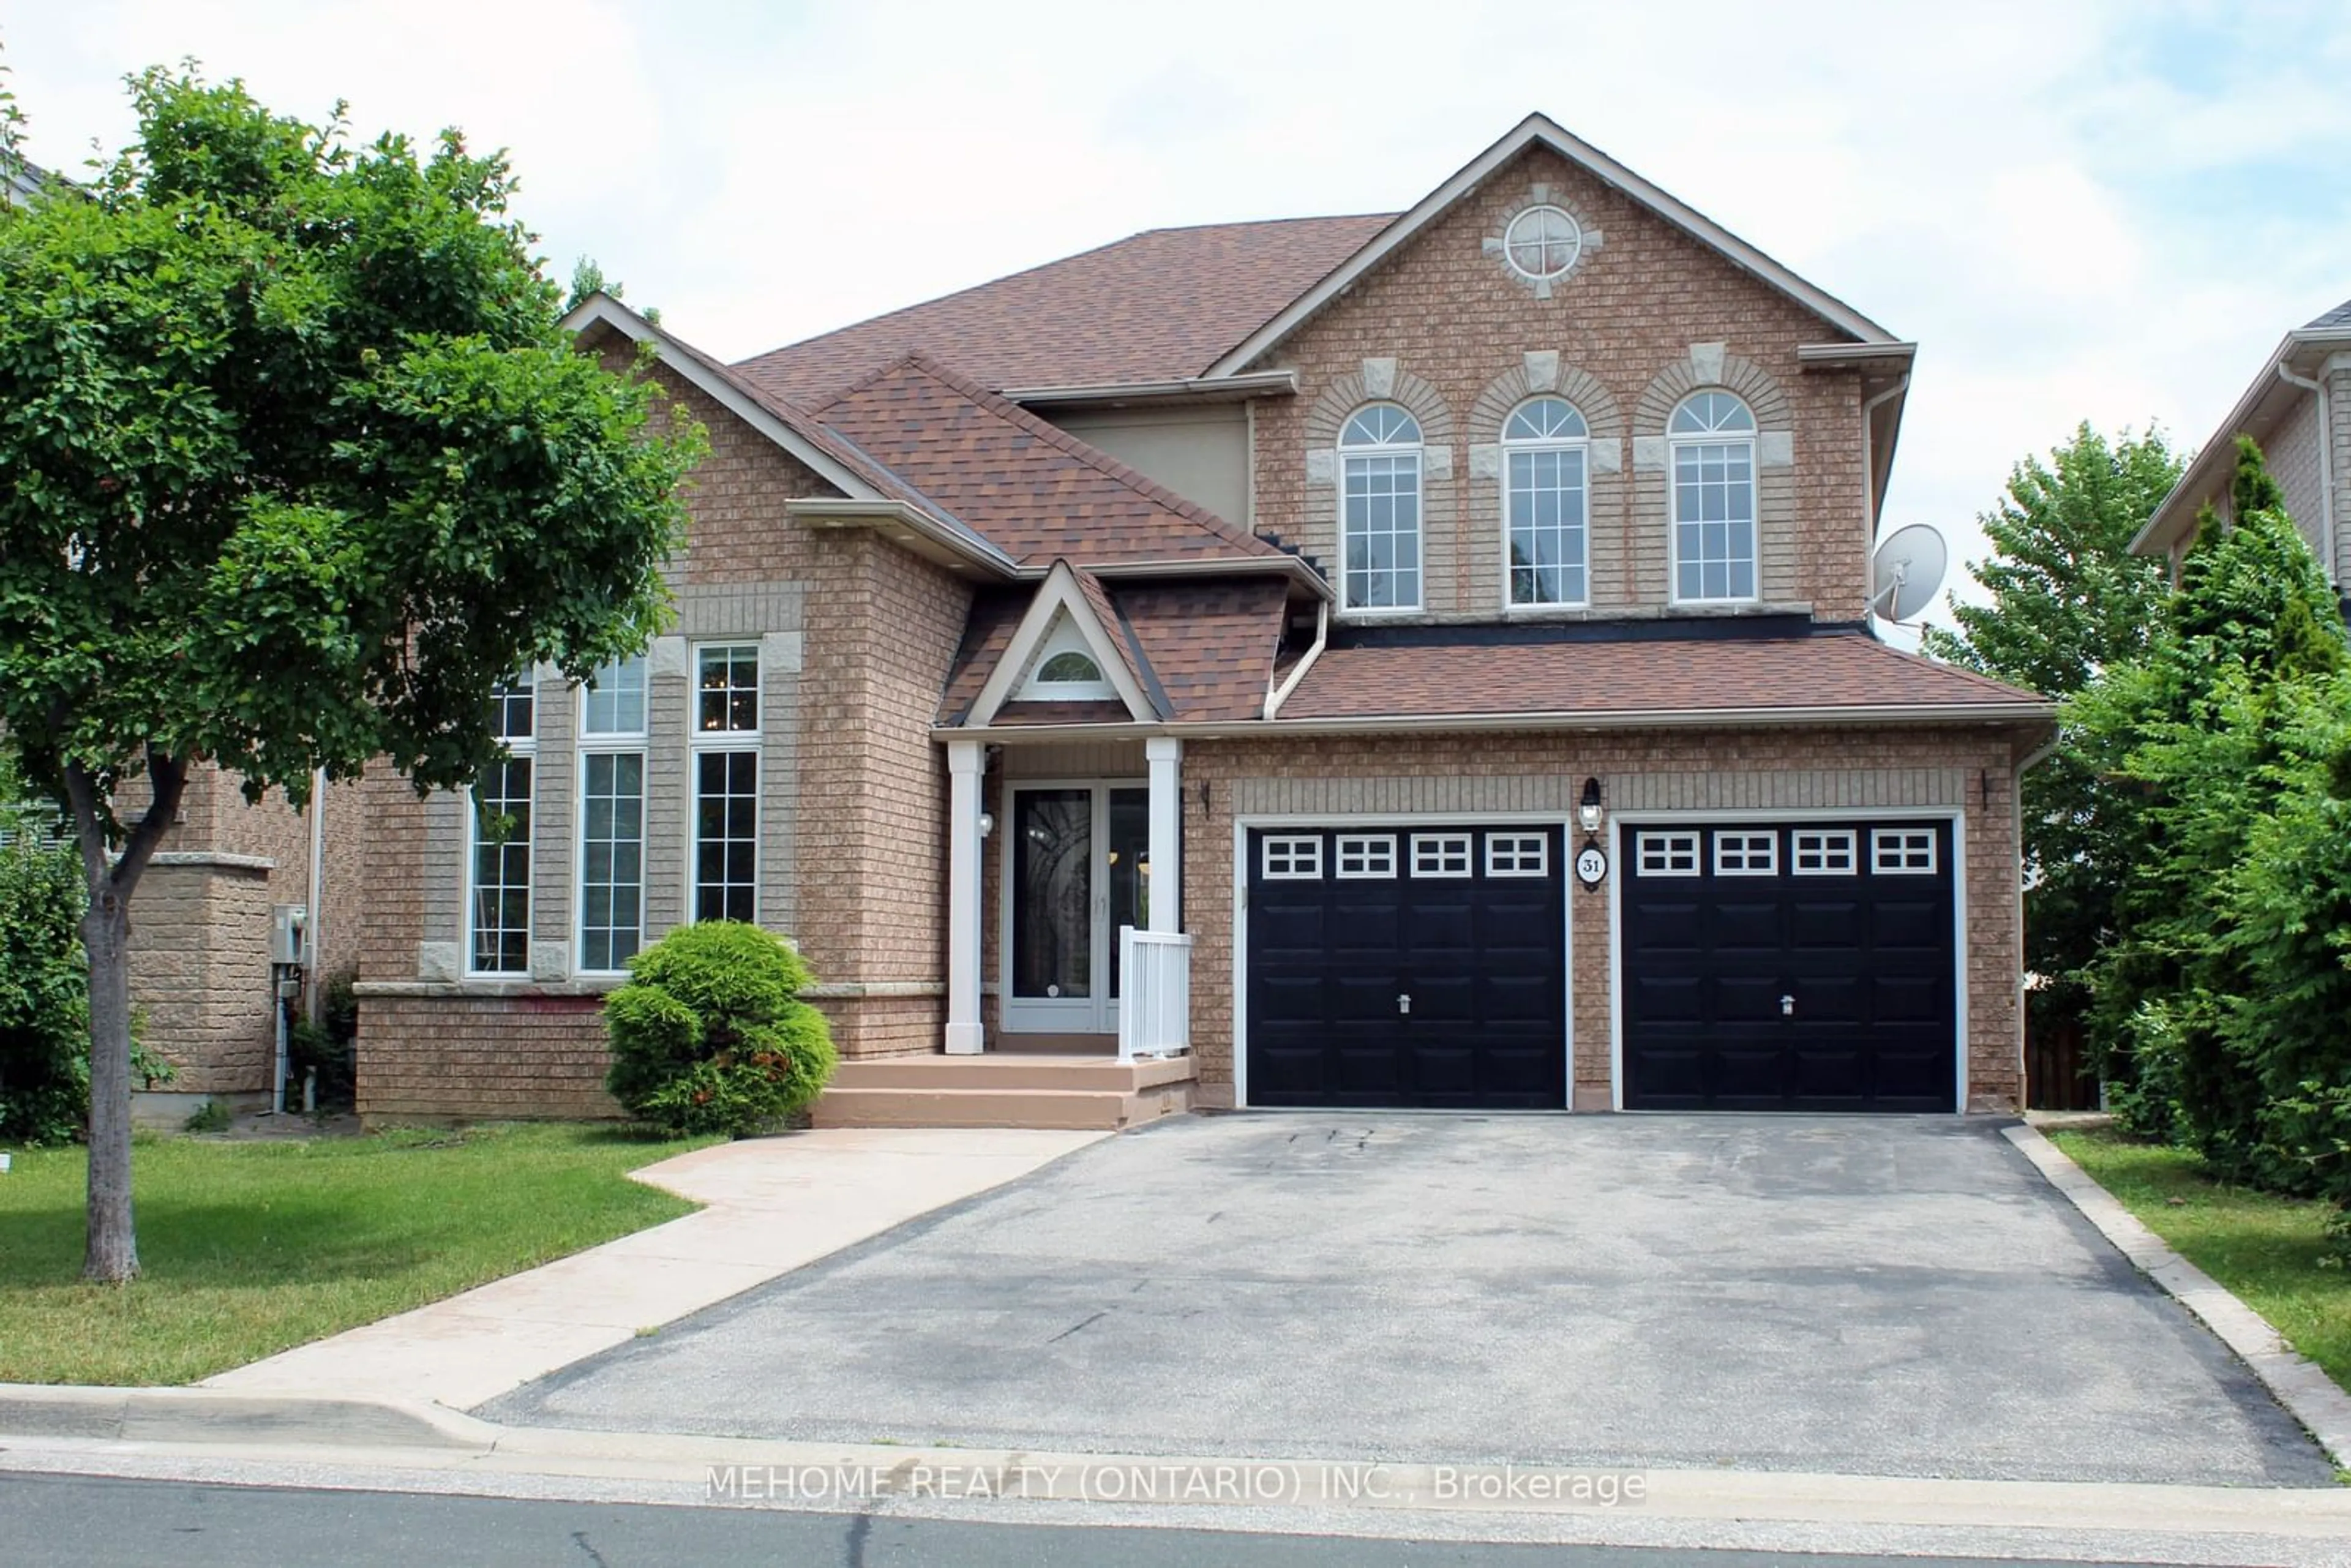 Home with brick exterior material for 31 Chalone Cres, Vaughan Ontario L4H 1V6